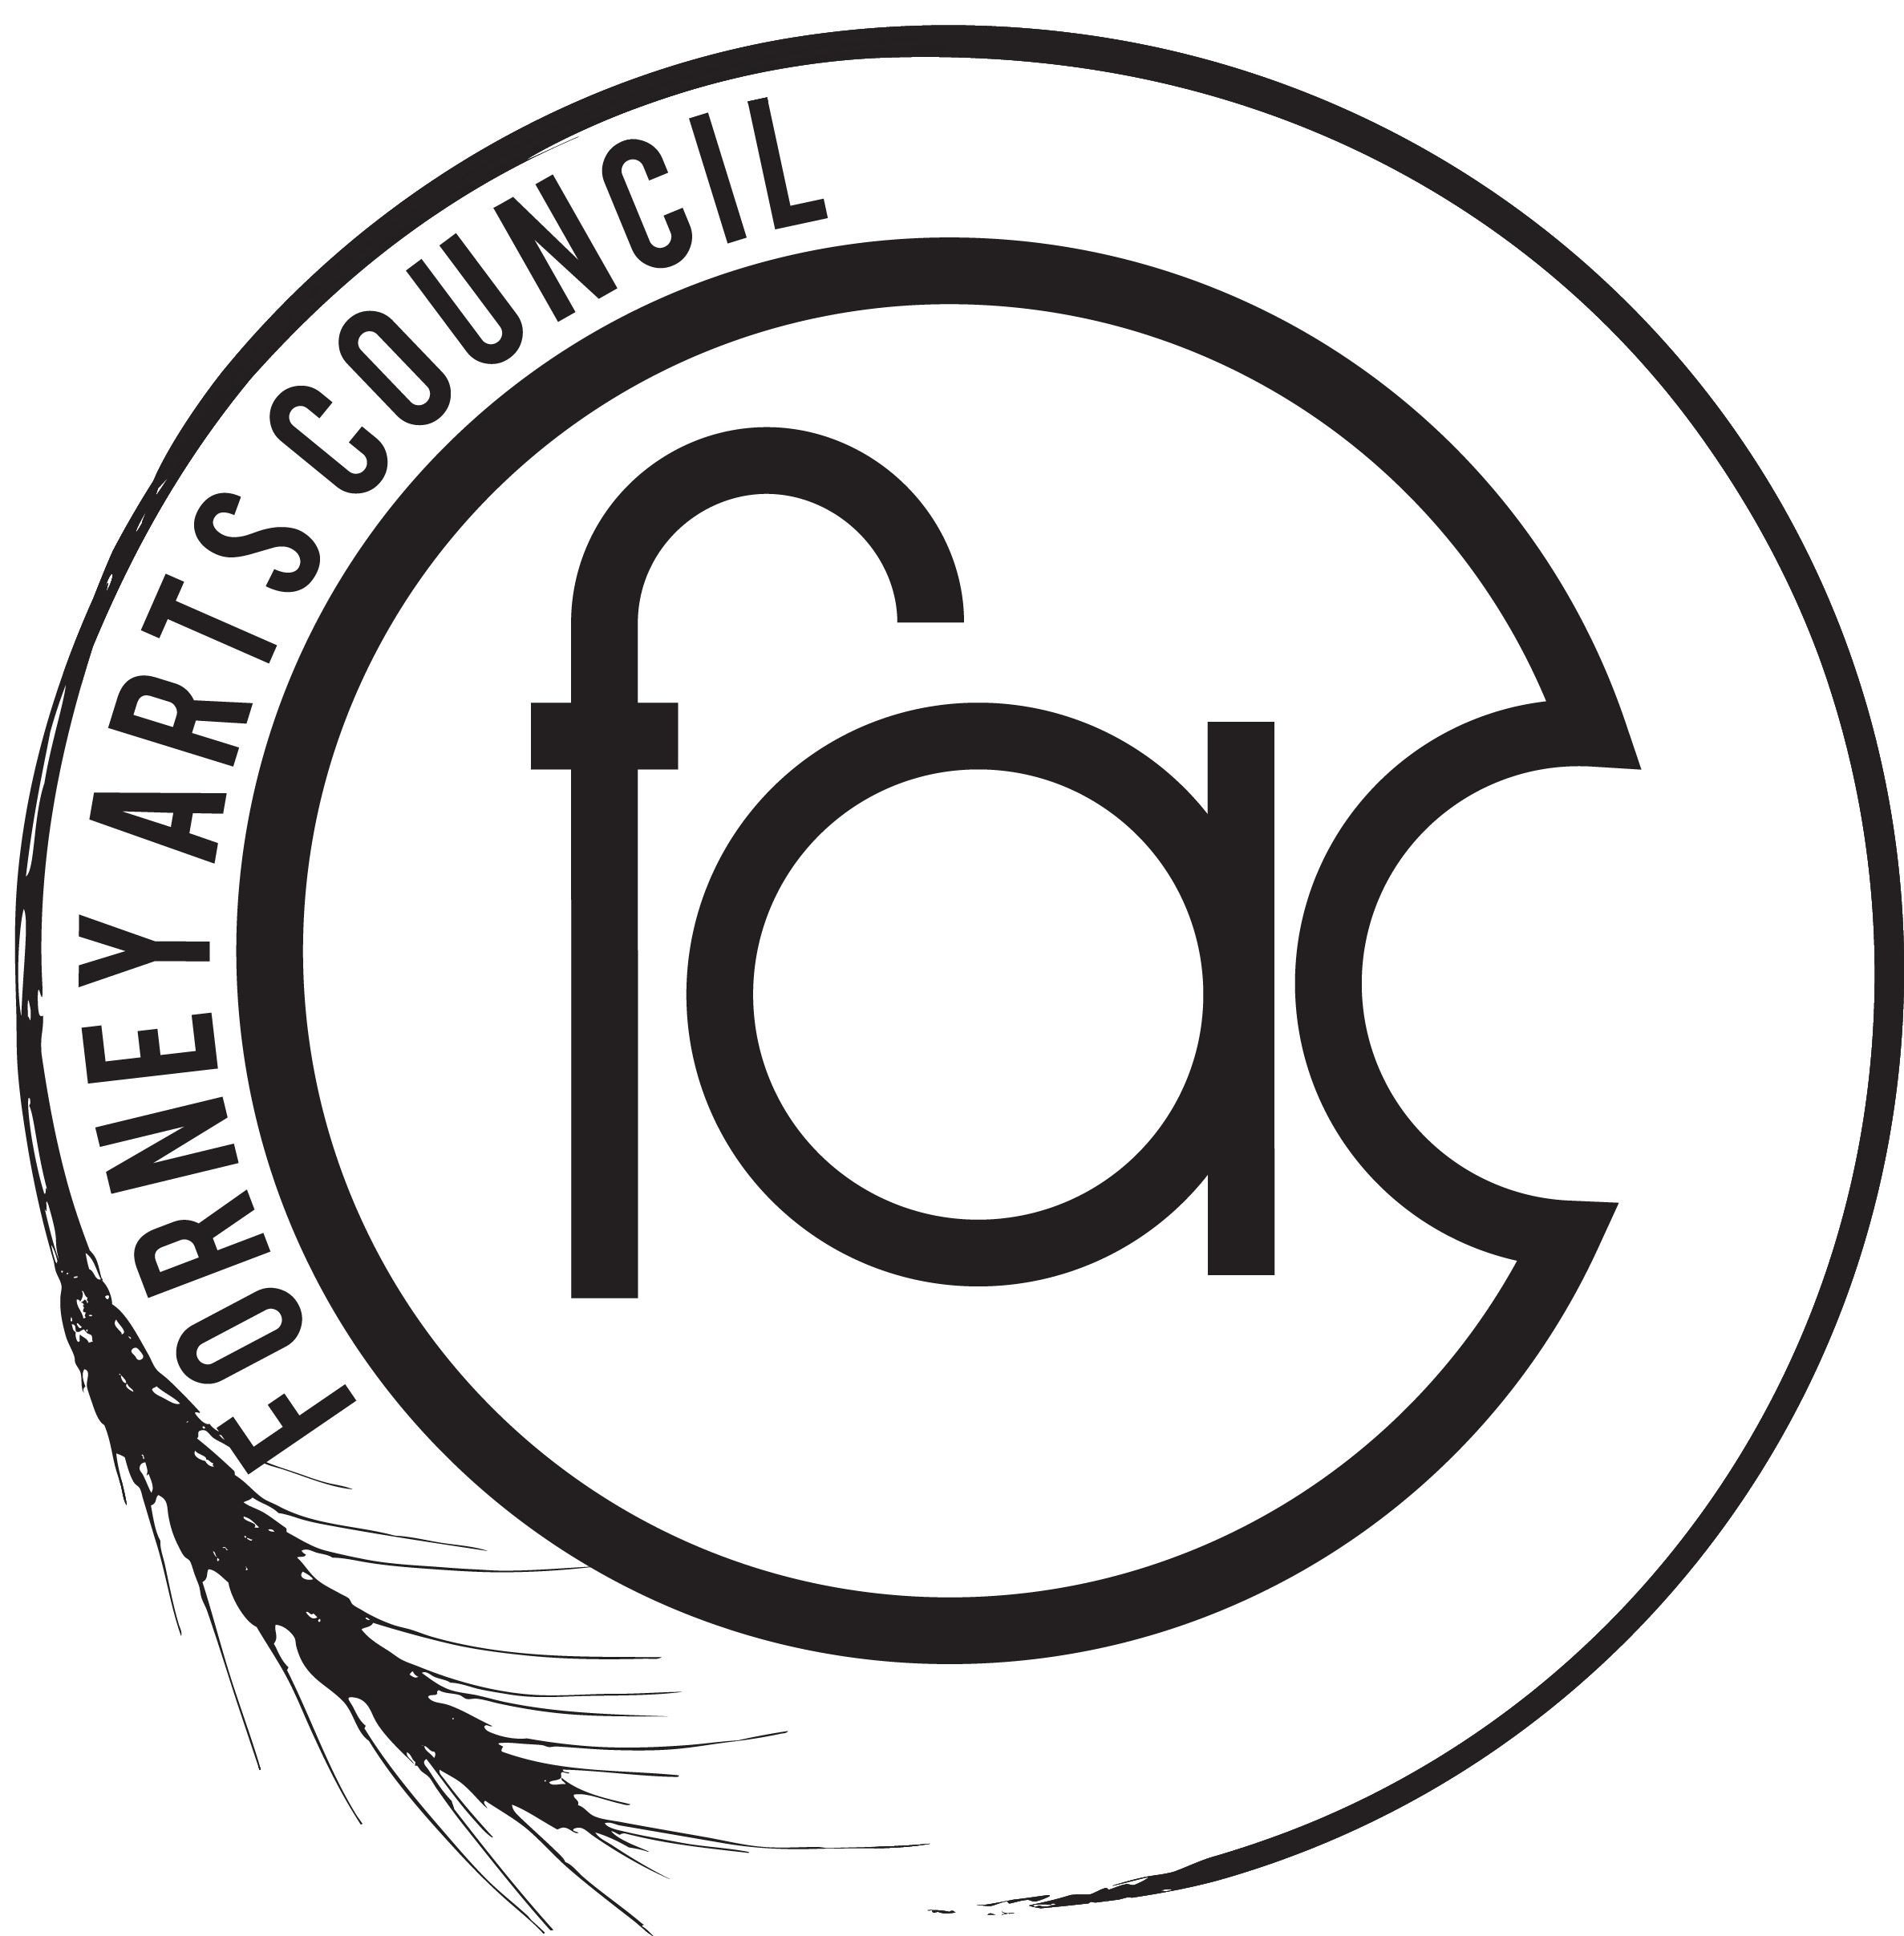 The Forney Arts Council